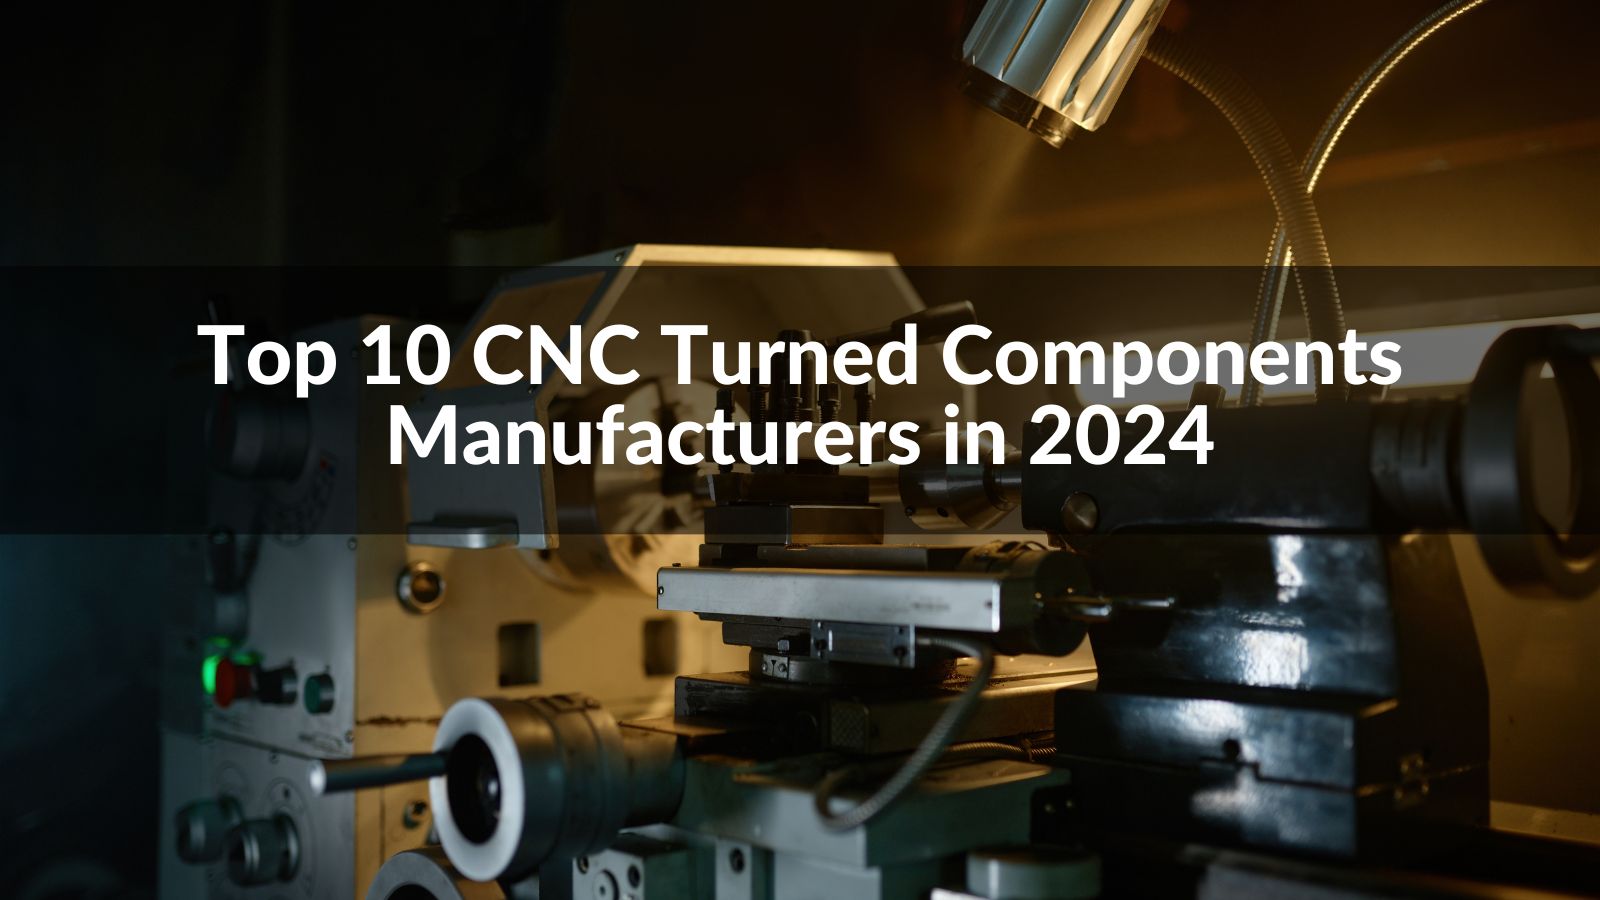 Top 10 CNC Turned Components Manufacturers in 2024